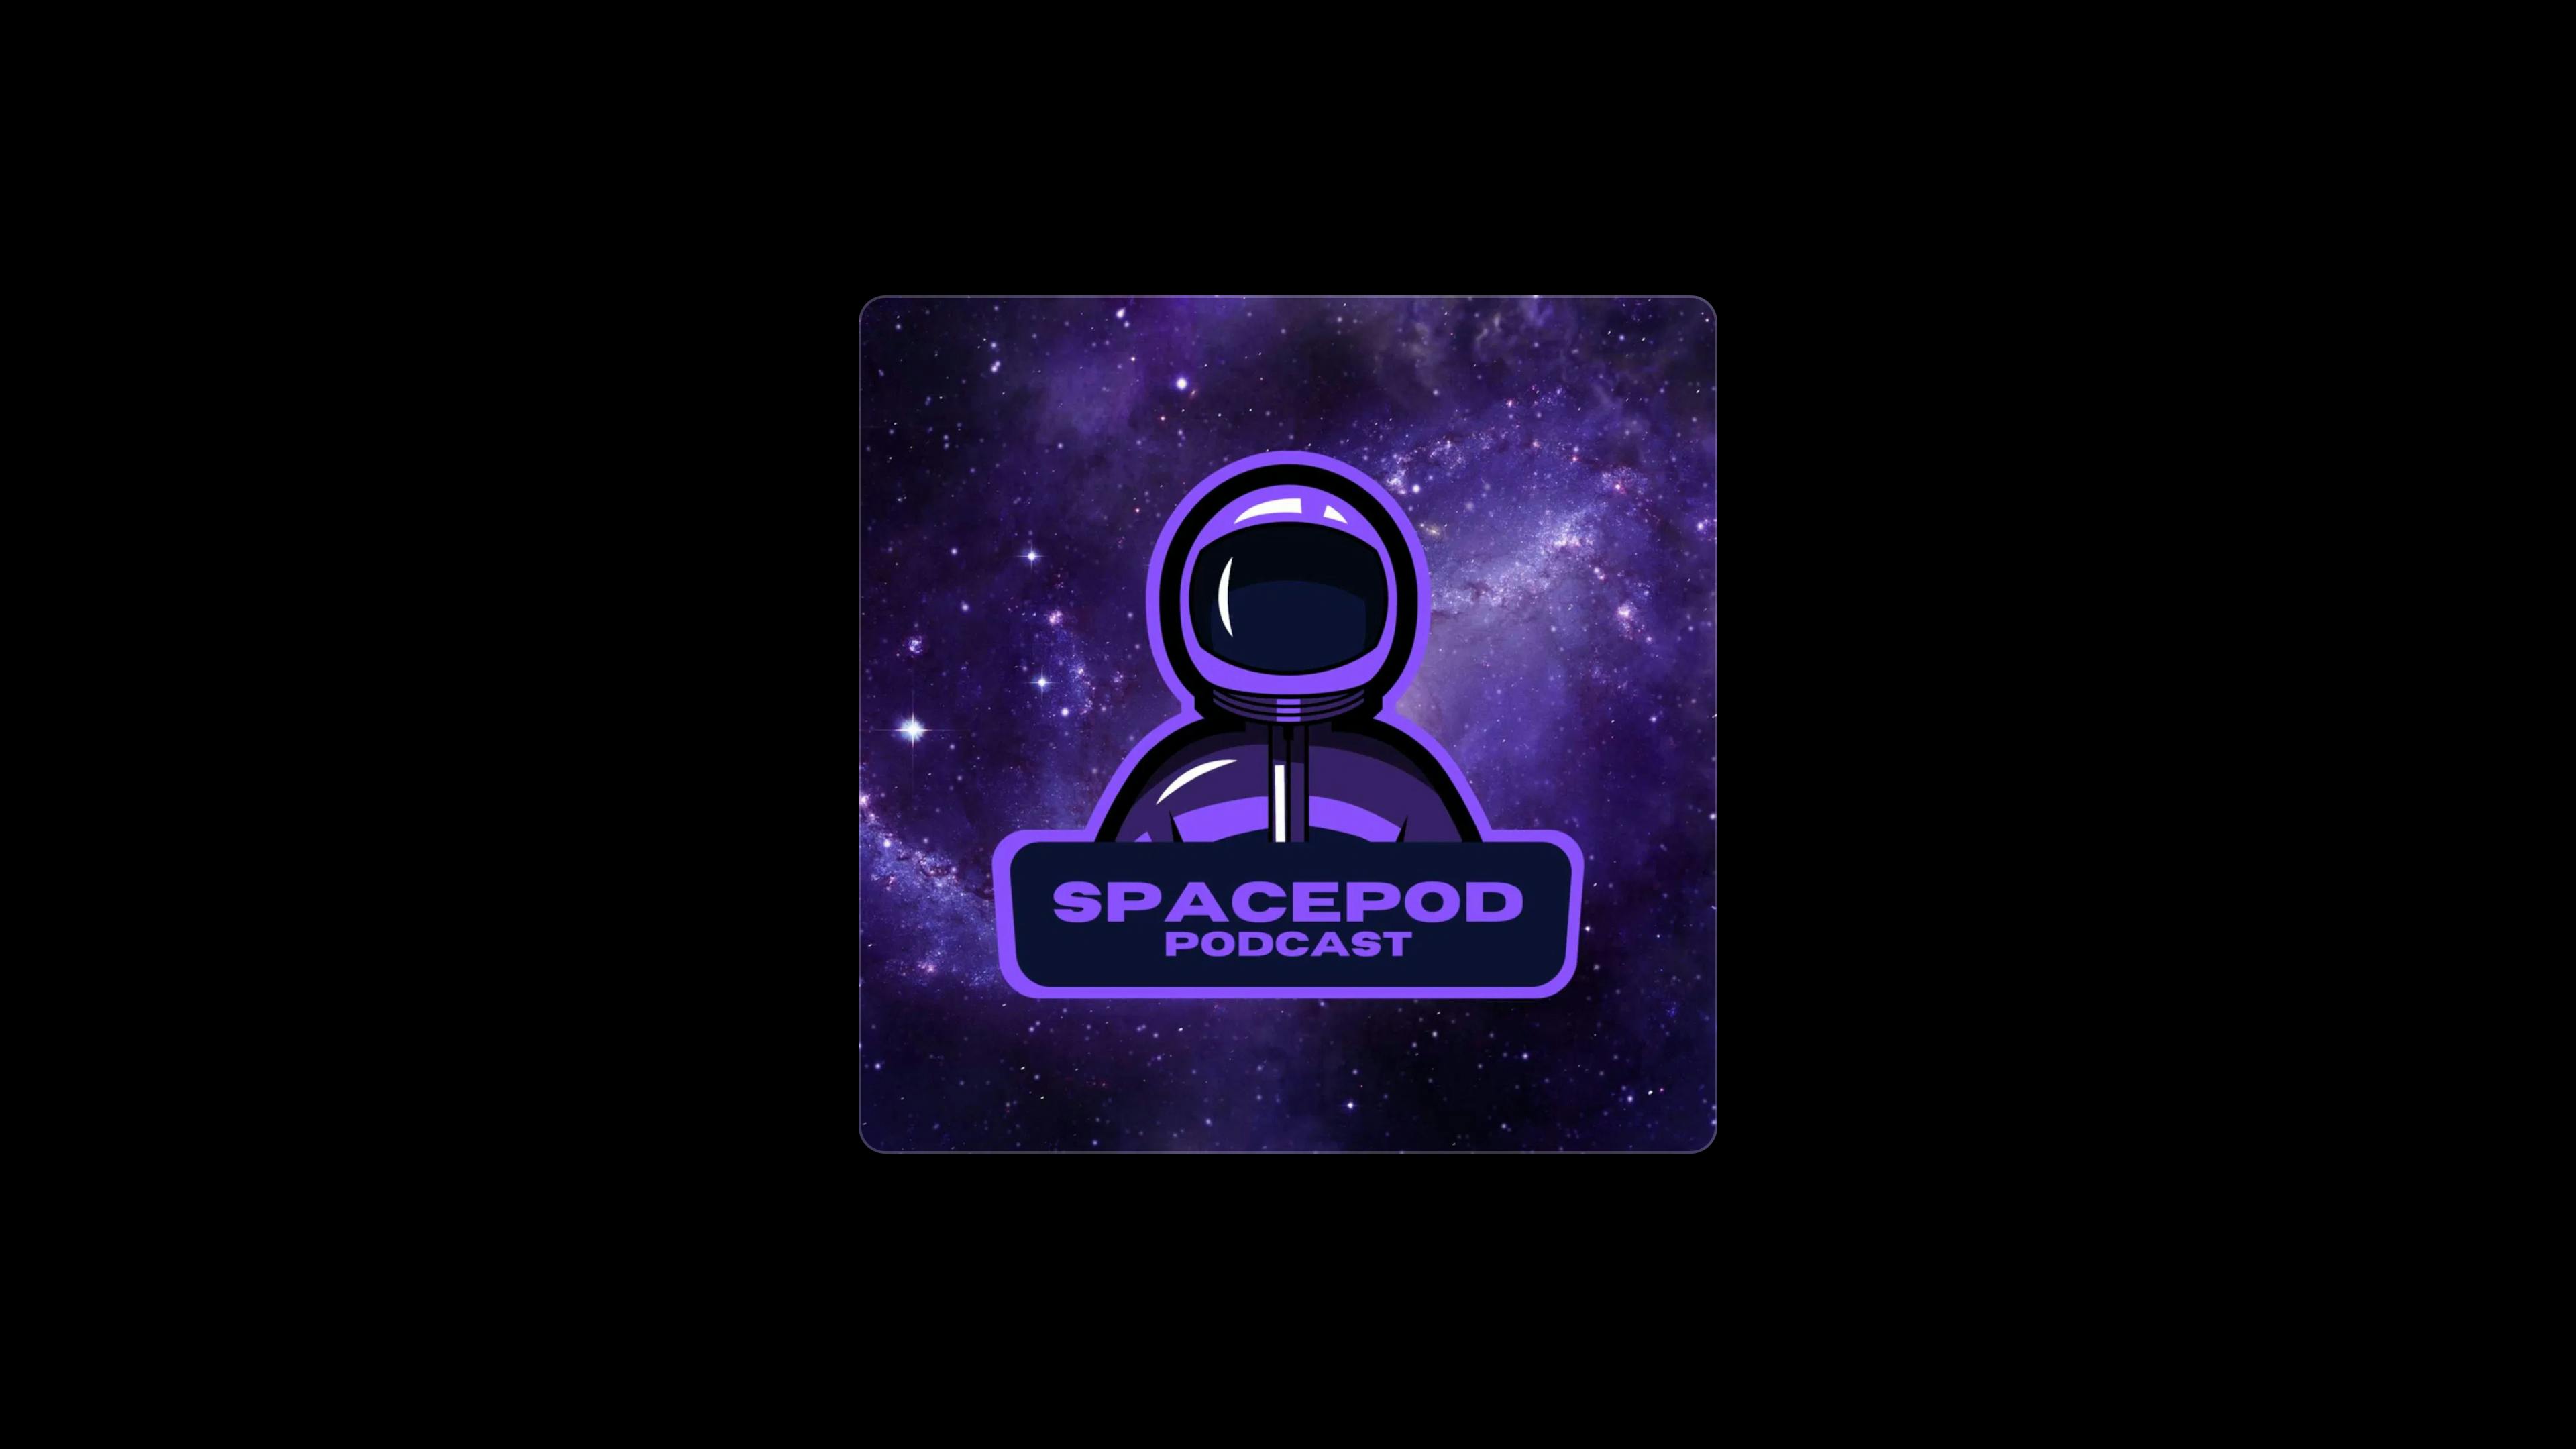 Spacepod Podcast Space theme Podcast